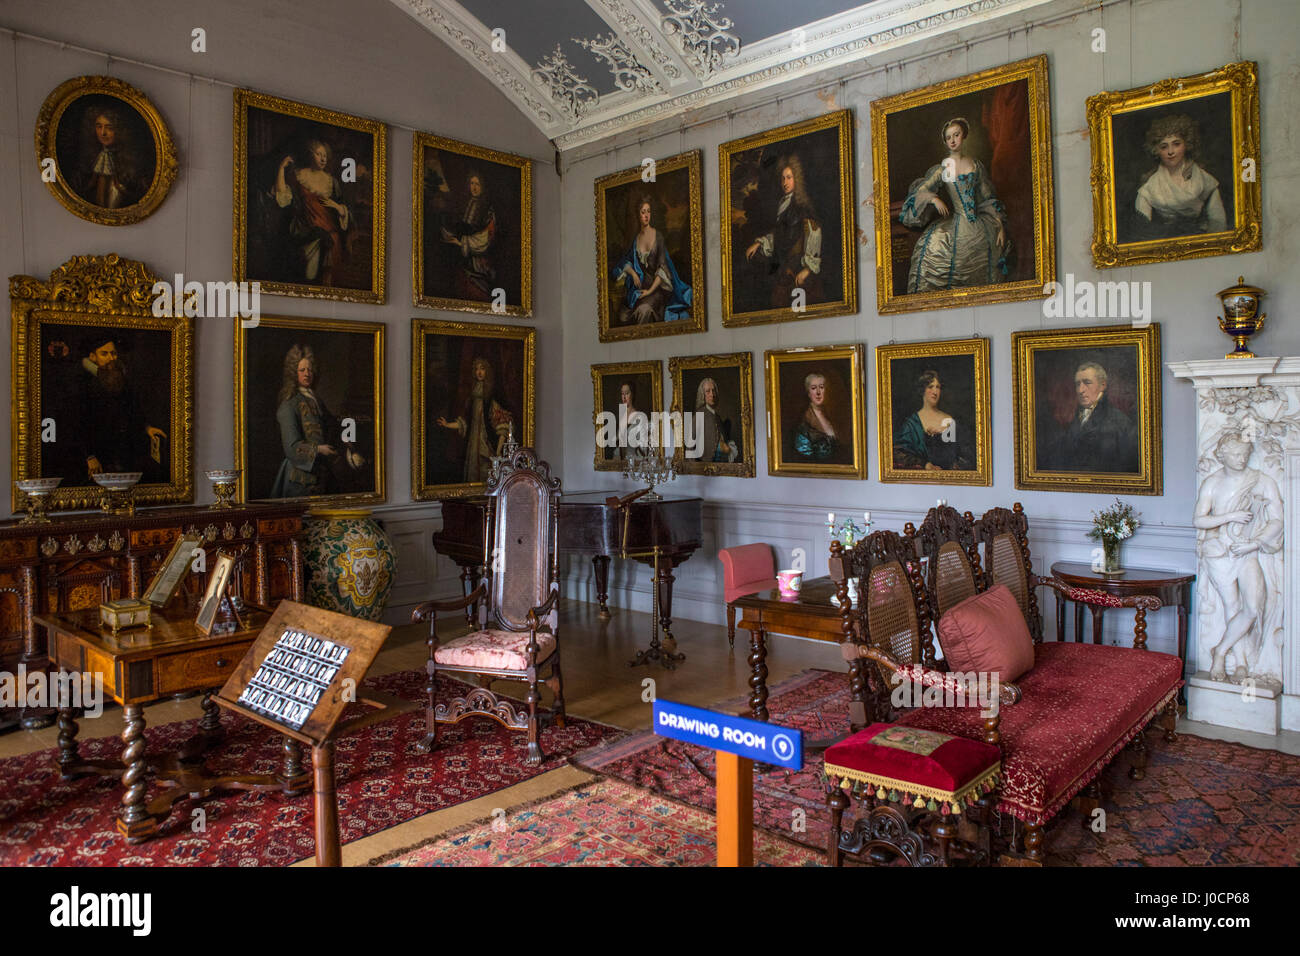 CUMBRIA, UK - APRIL 5TH 2017: A view of the Drawing Room at Muncaster Castle in the Lake District in Cumbria, UK, on 5th April 2017. Stock Photo